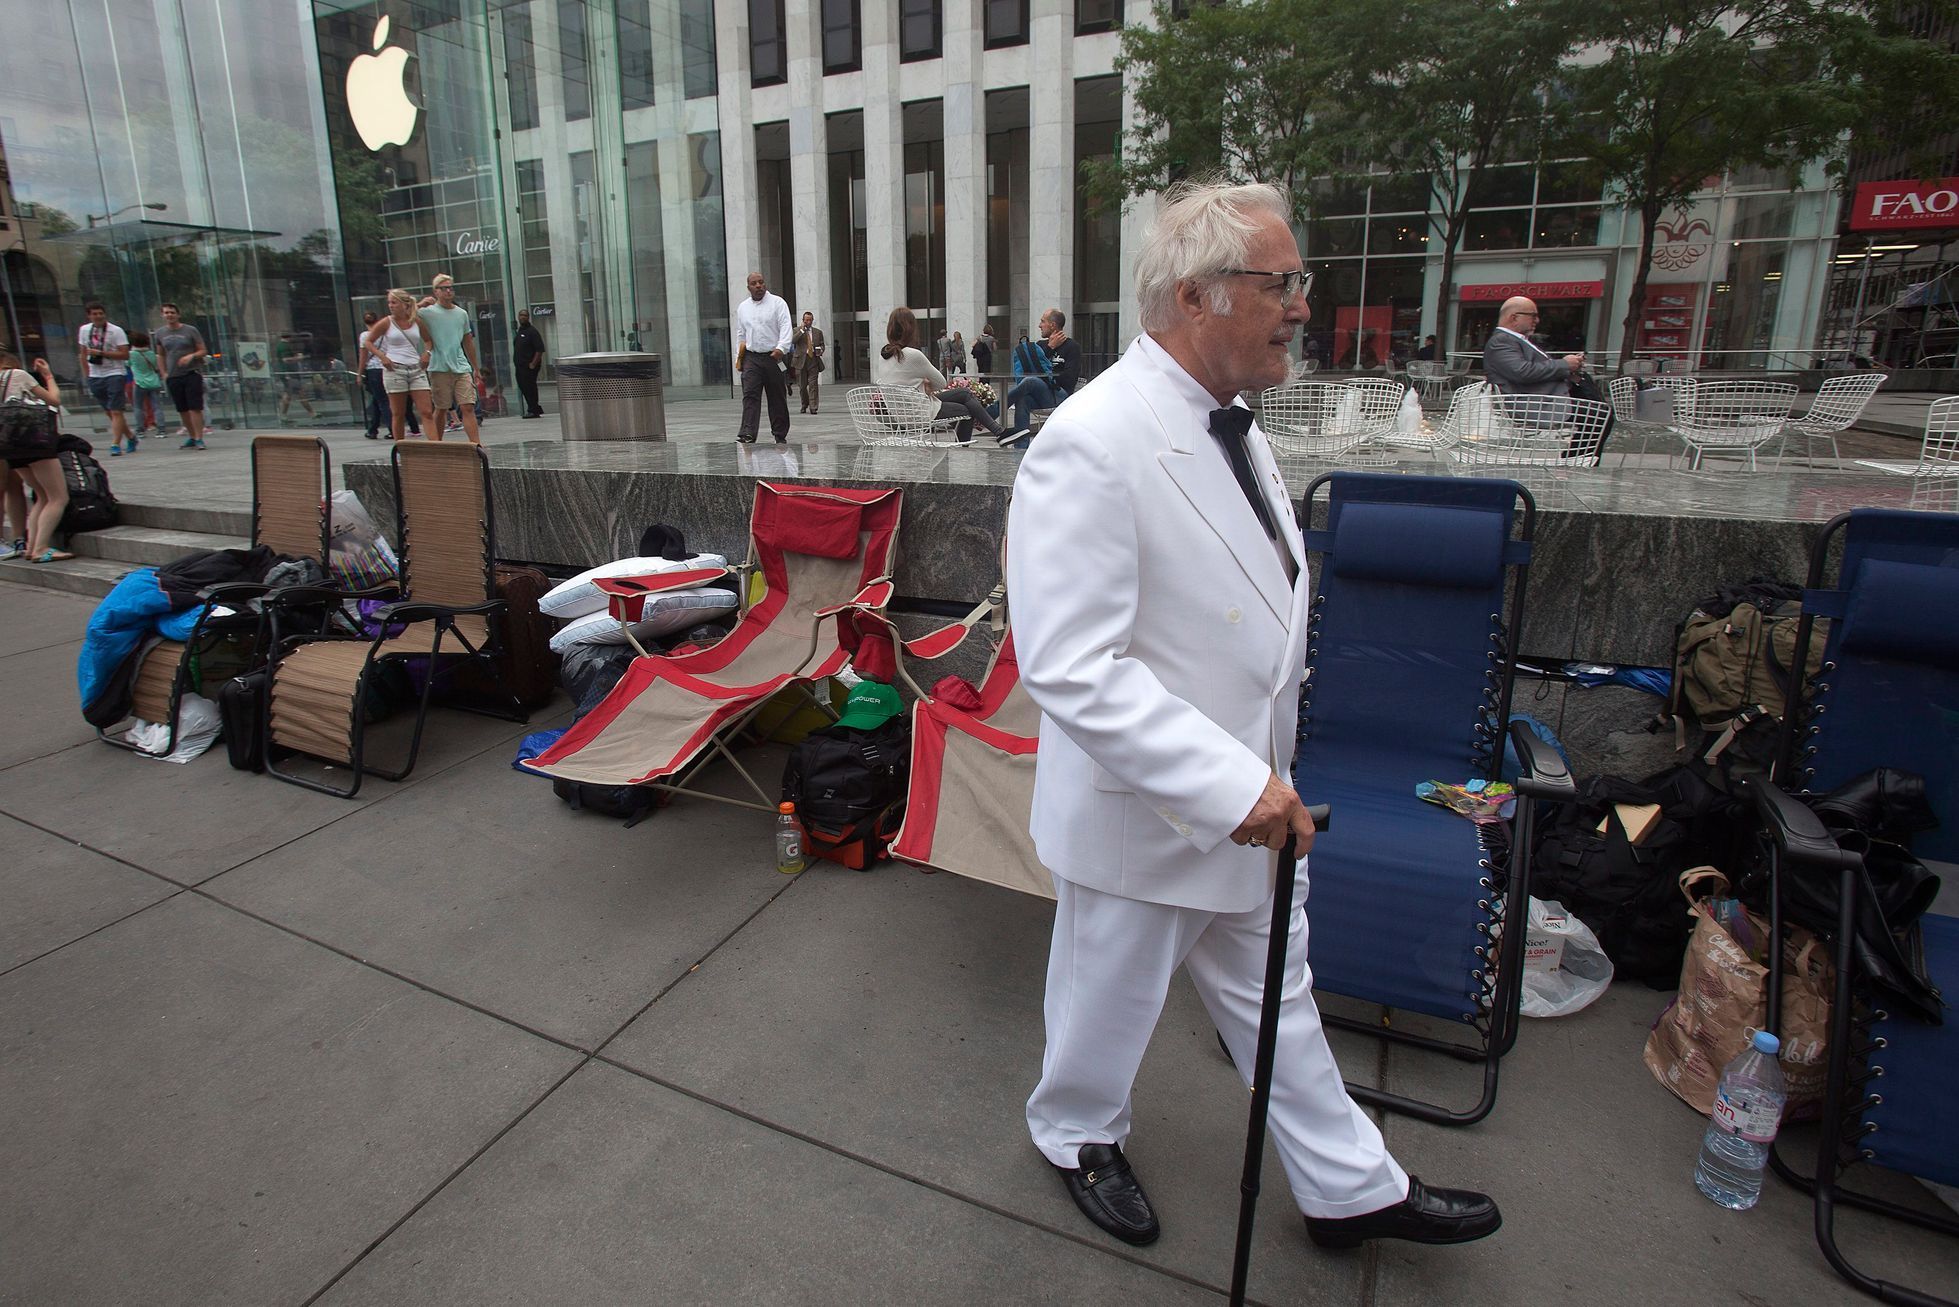 A man, dressed up as Colonel Sanders, walks outside the Apple Store in advance of an Apple special event, in the Manhattan borough of New York